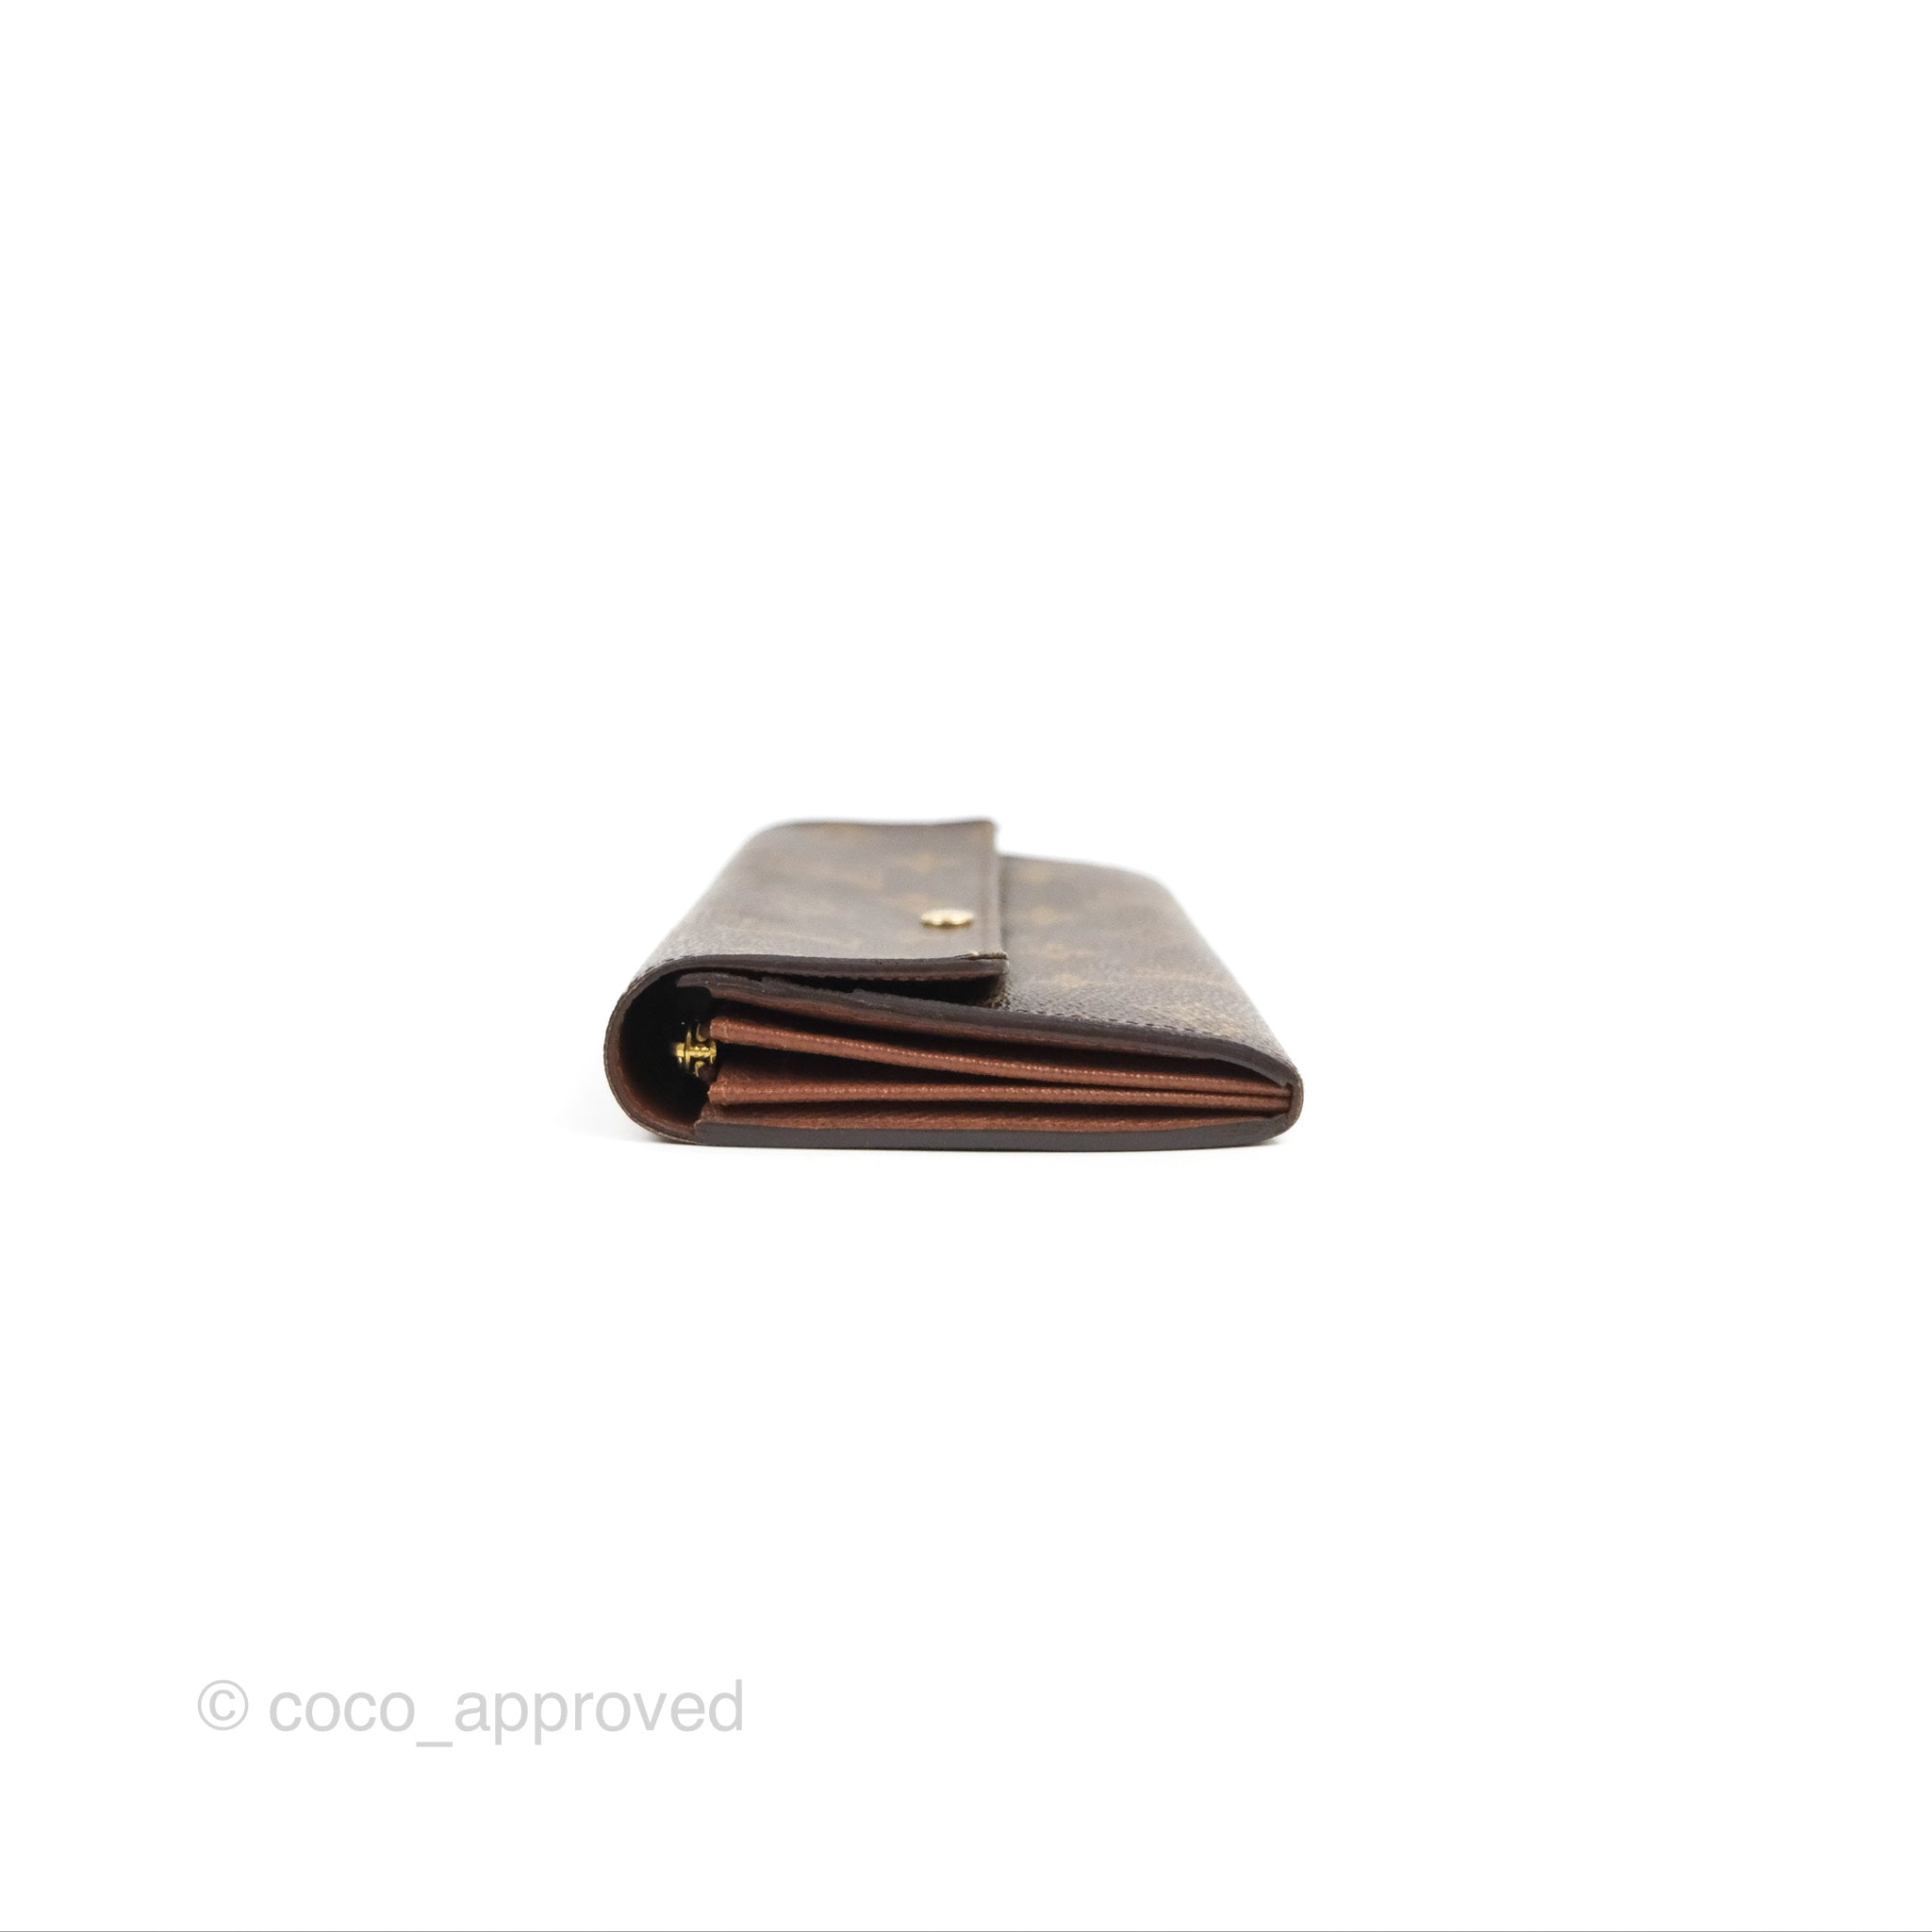 Long Leather Sarah Wallet (Authentic Pre-Owned)